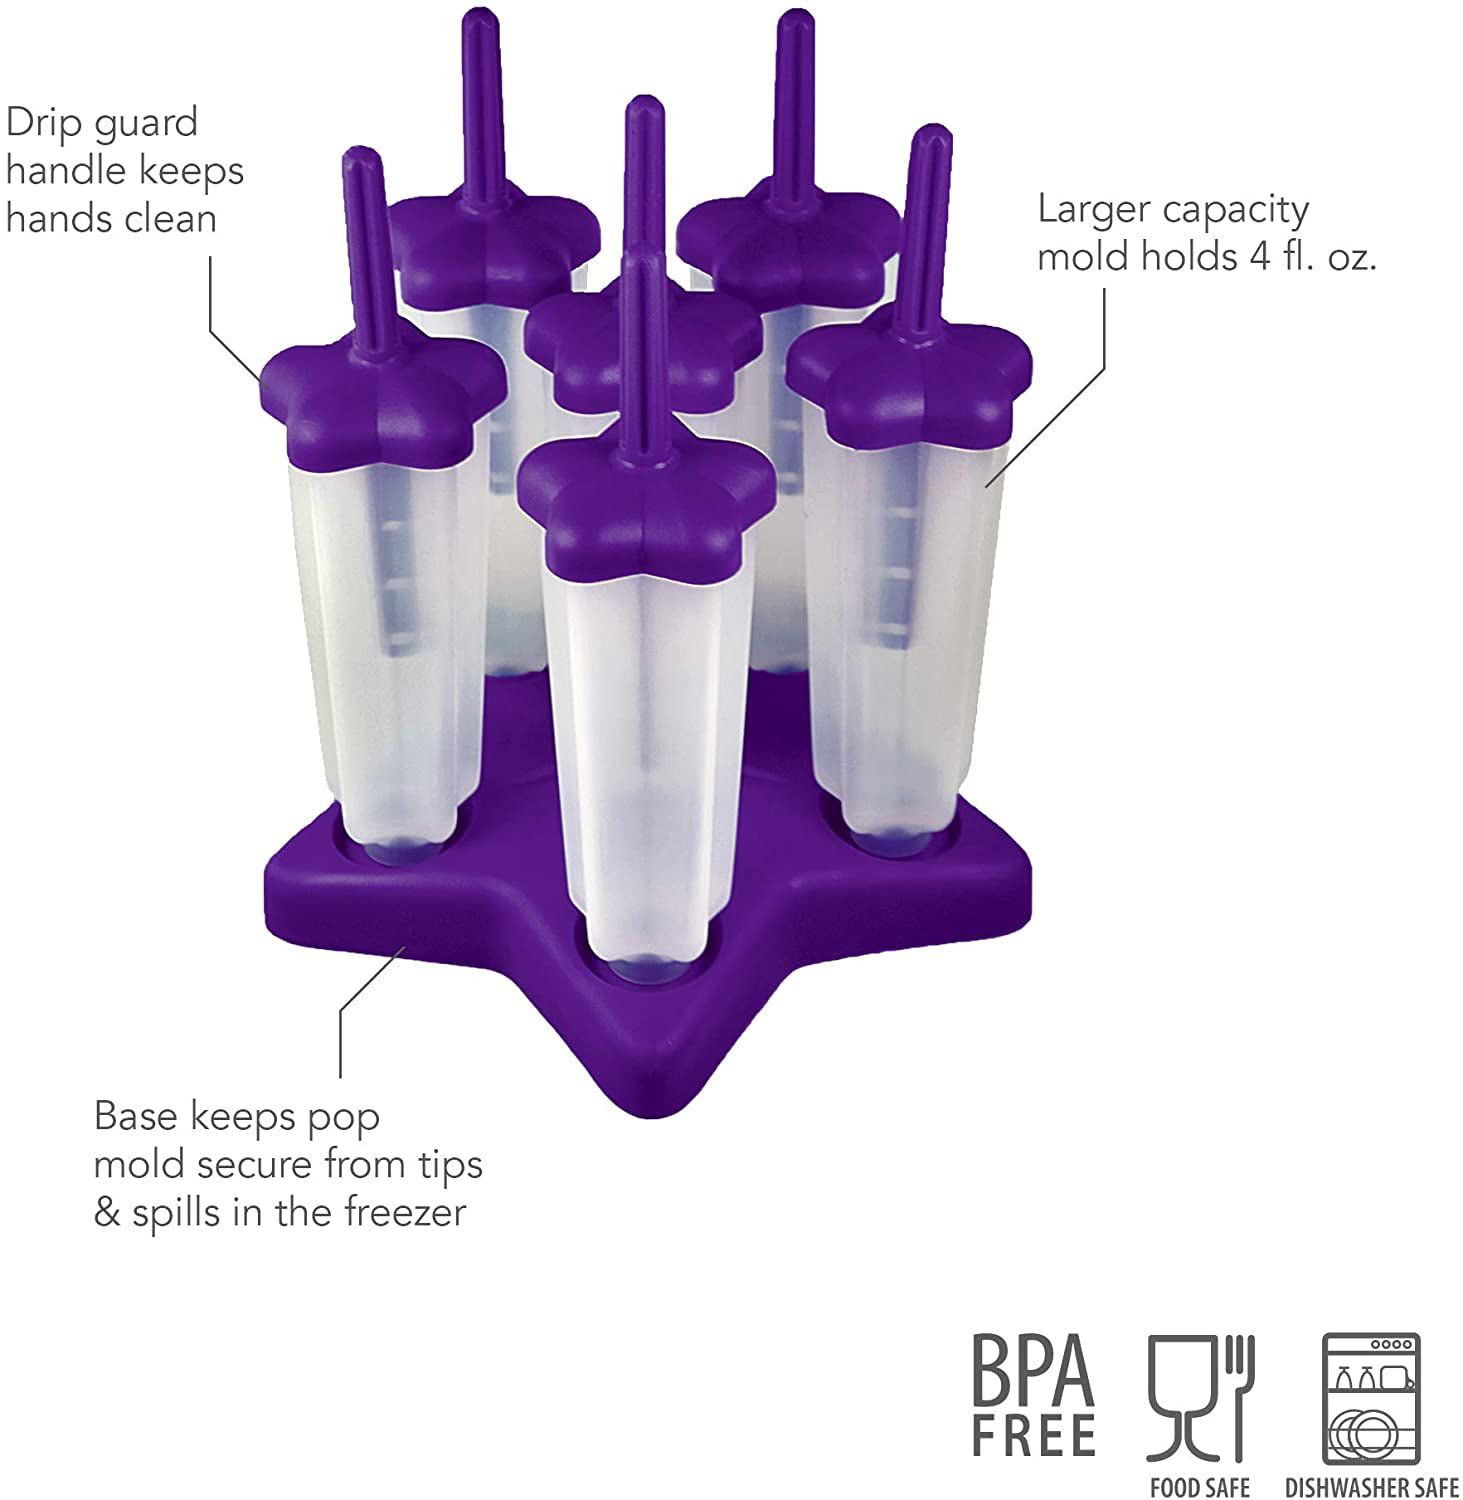 Mess-Free Frozen Treats 4 Ounce Set of 6 Ice Pop Molds Popsicle Makers with Reusable Sticks Drip-Guard Handle Tovolo Star Purple 